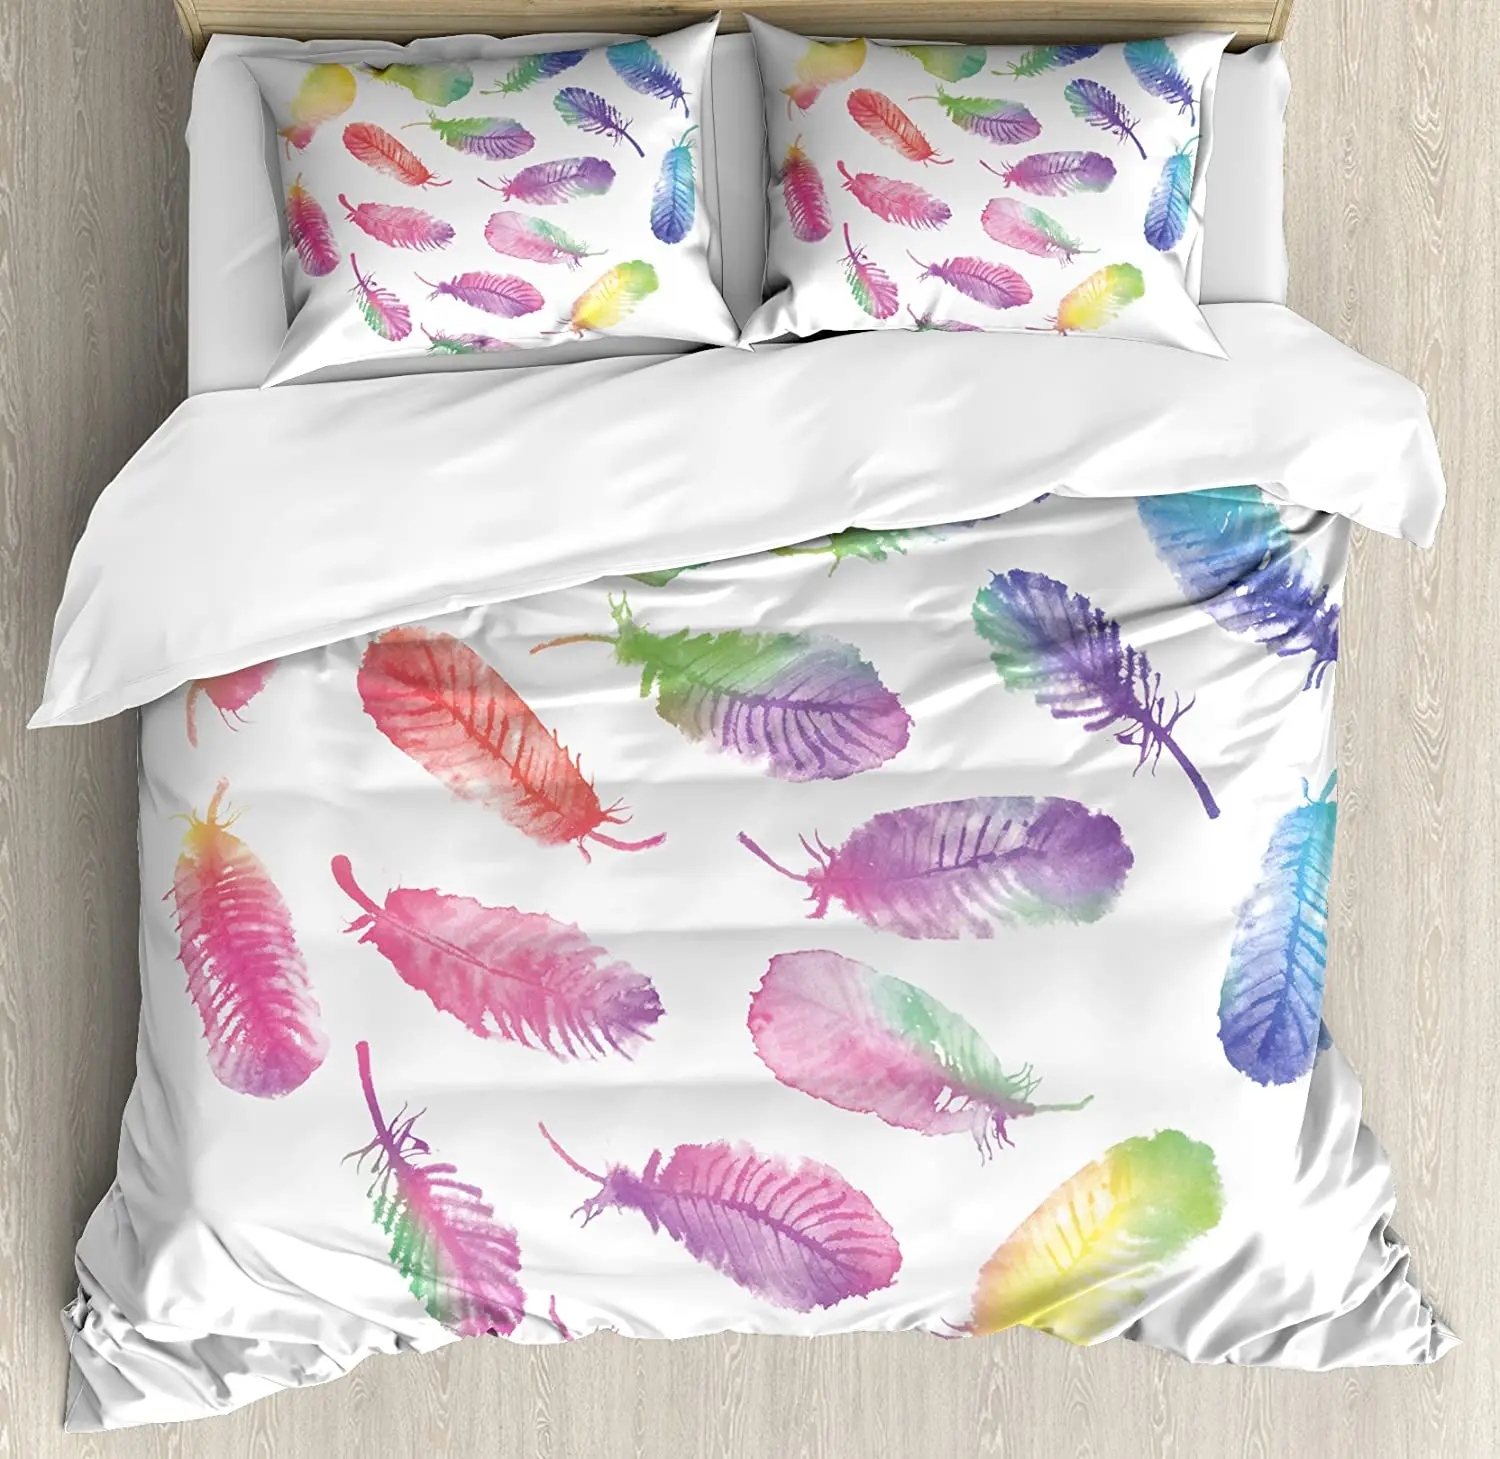 Feather Bedding Set For Home Bed Fluffy Dreamy Artistic Pattern with Watercolor Elements Plumage Romantic Design Duvet Cover